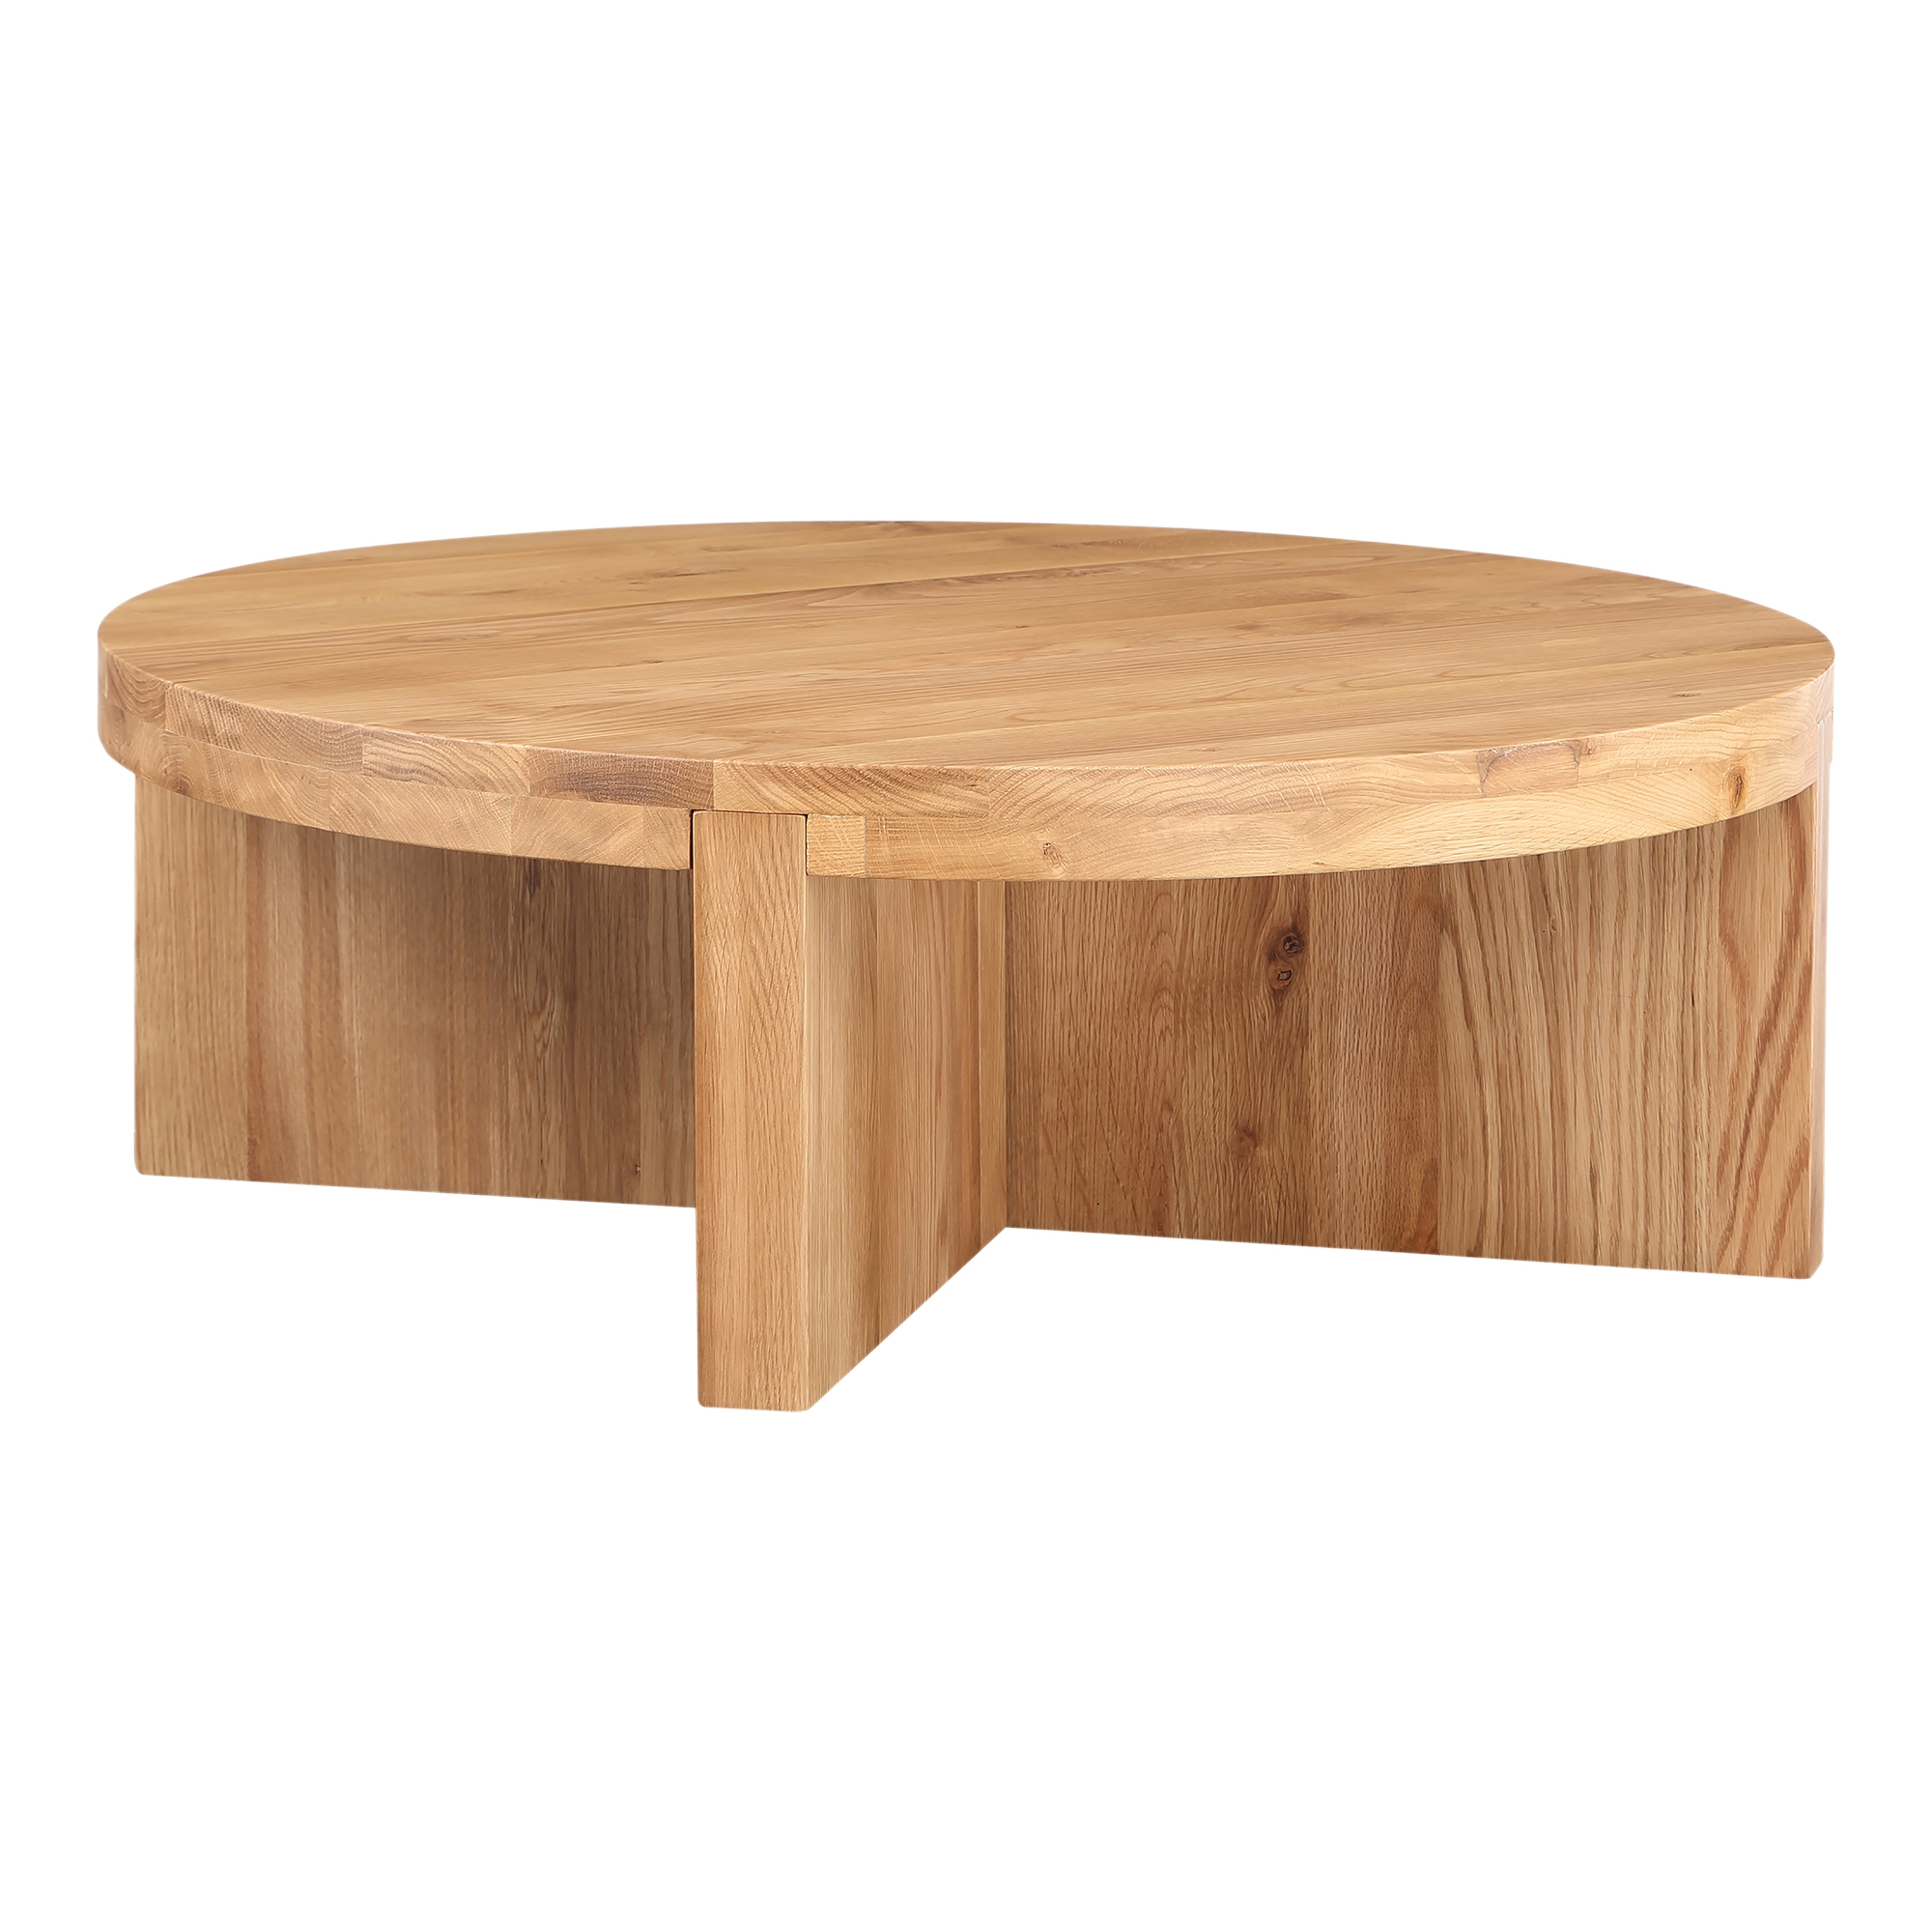 Folke Round Coffee Table Natural - Image 1